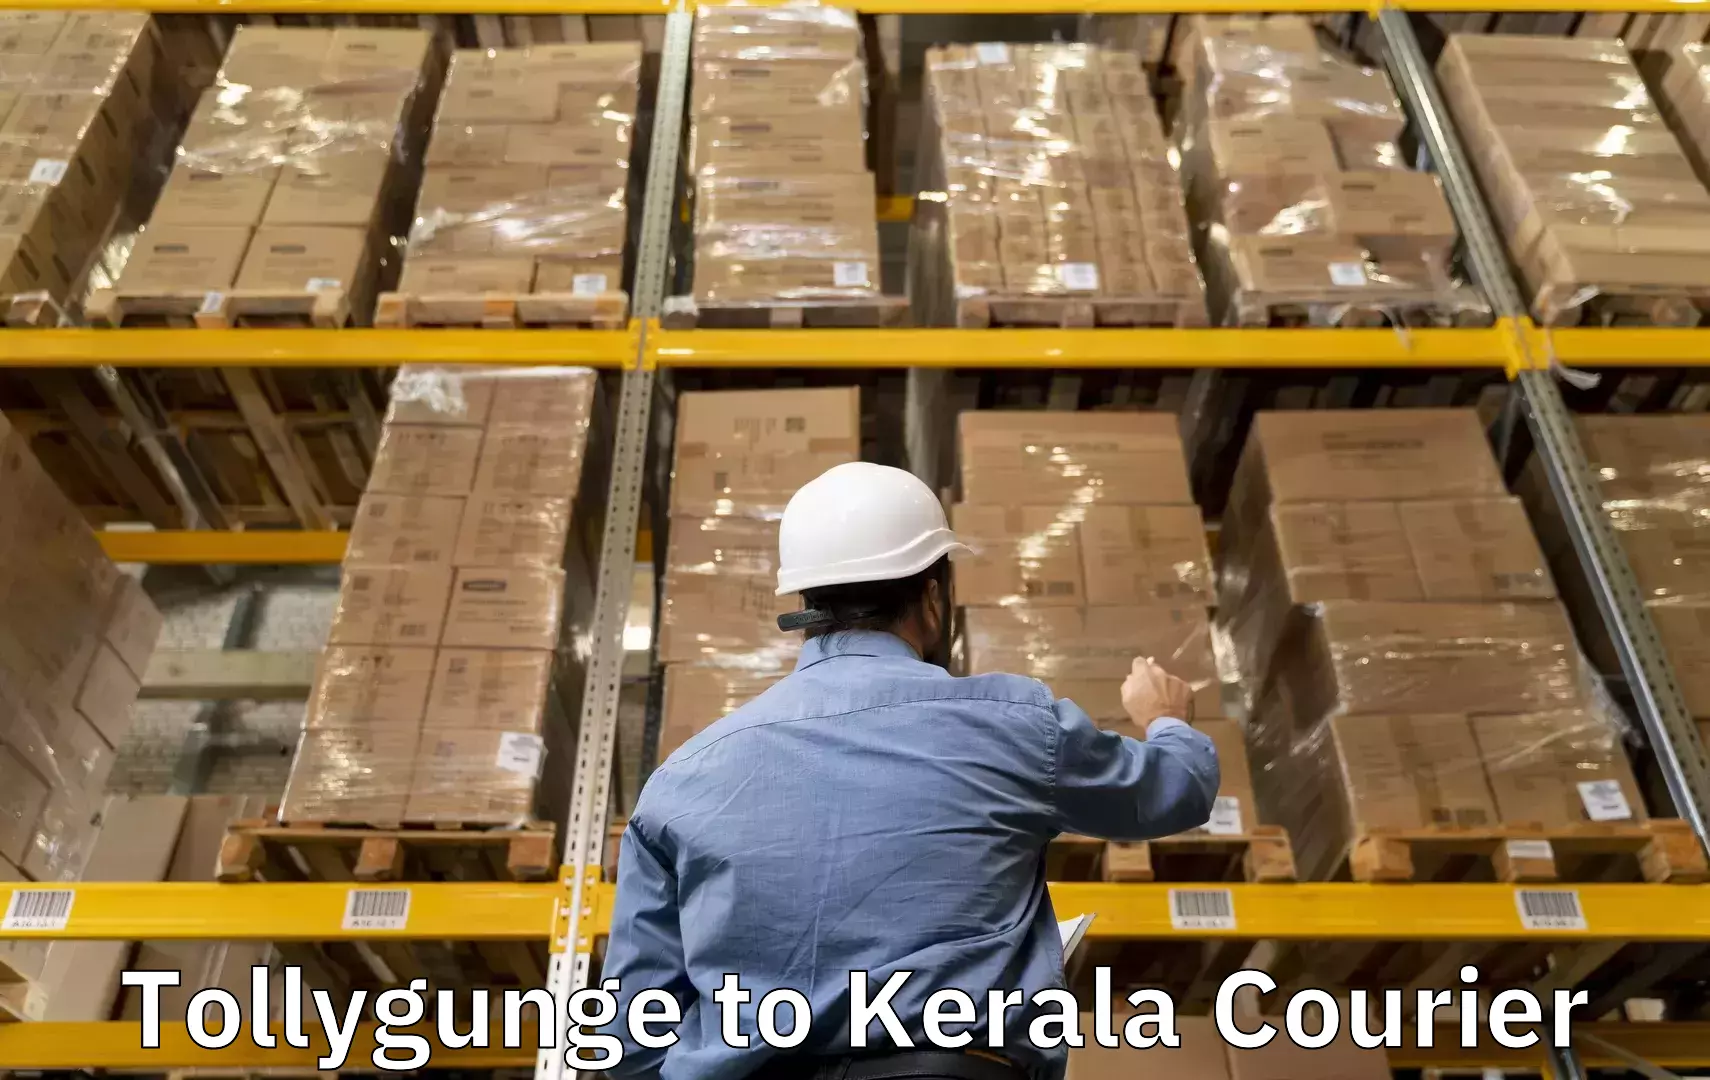 Baggage transport network Tollygunge to Cochin University of Science and Technology